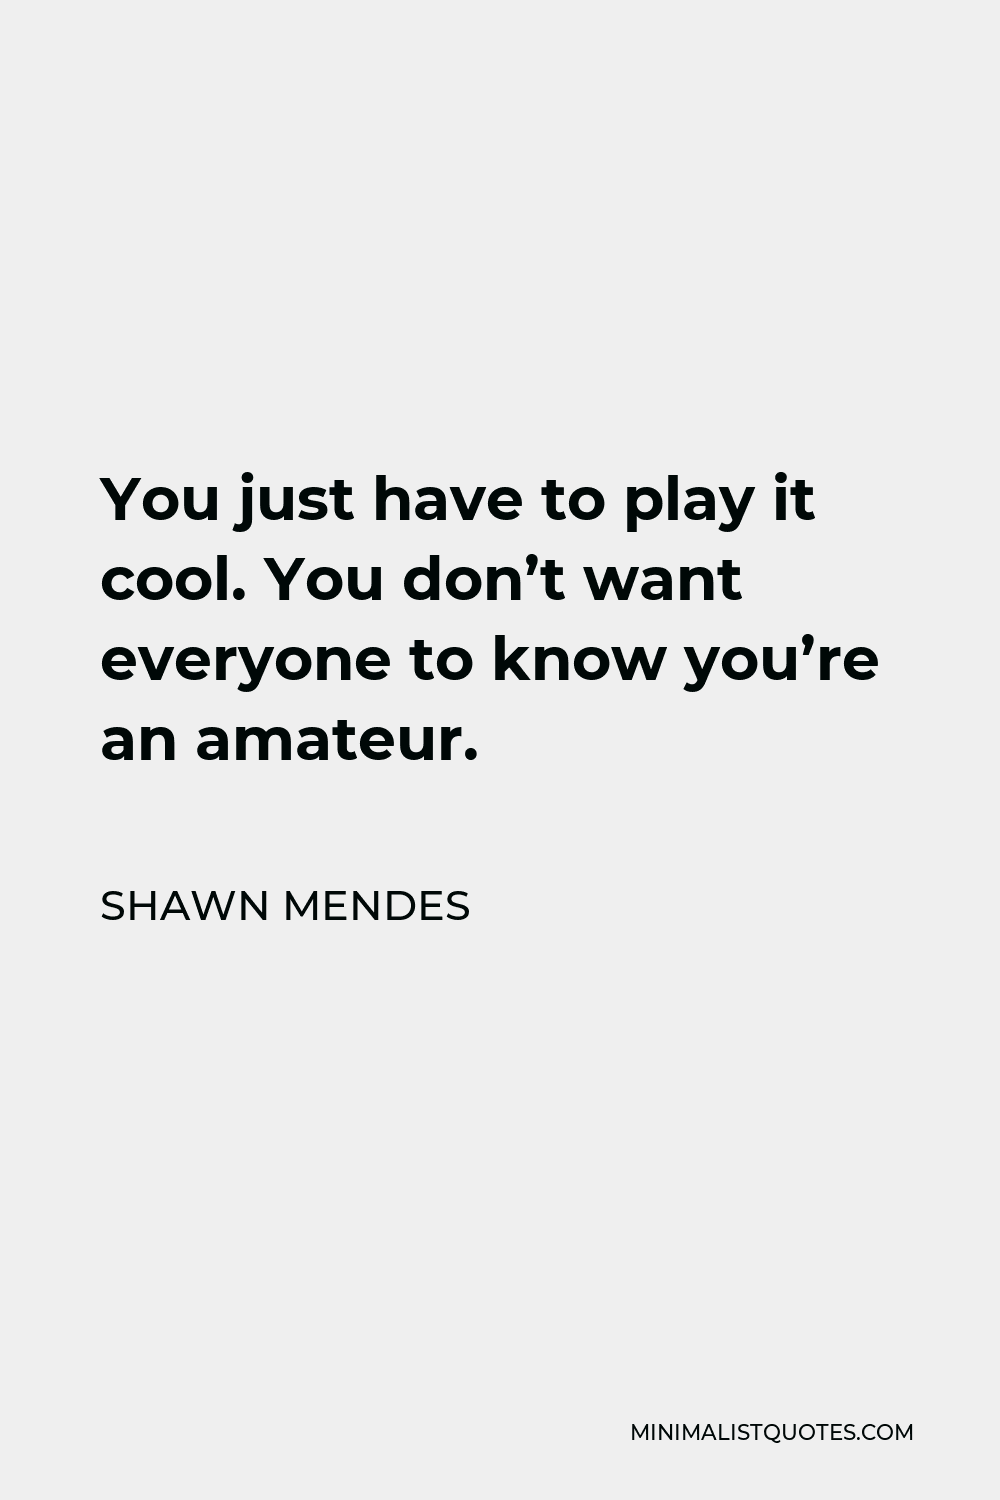 Shawn Mendes Quote - You just have to play it cool. You don’t want everyone to know you’re an amateur.